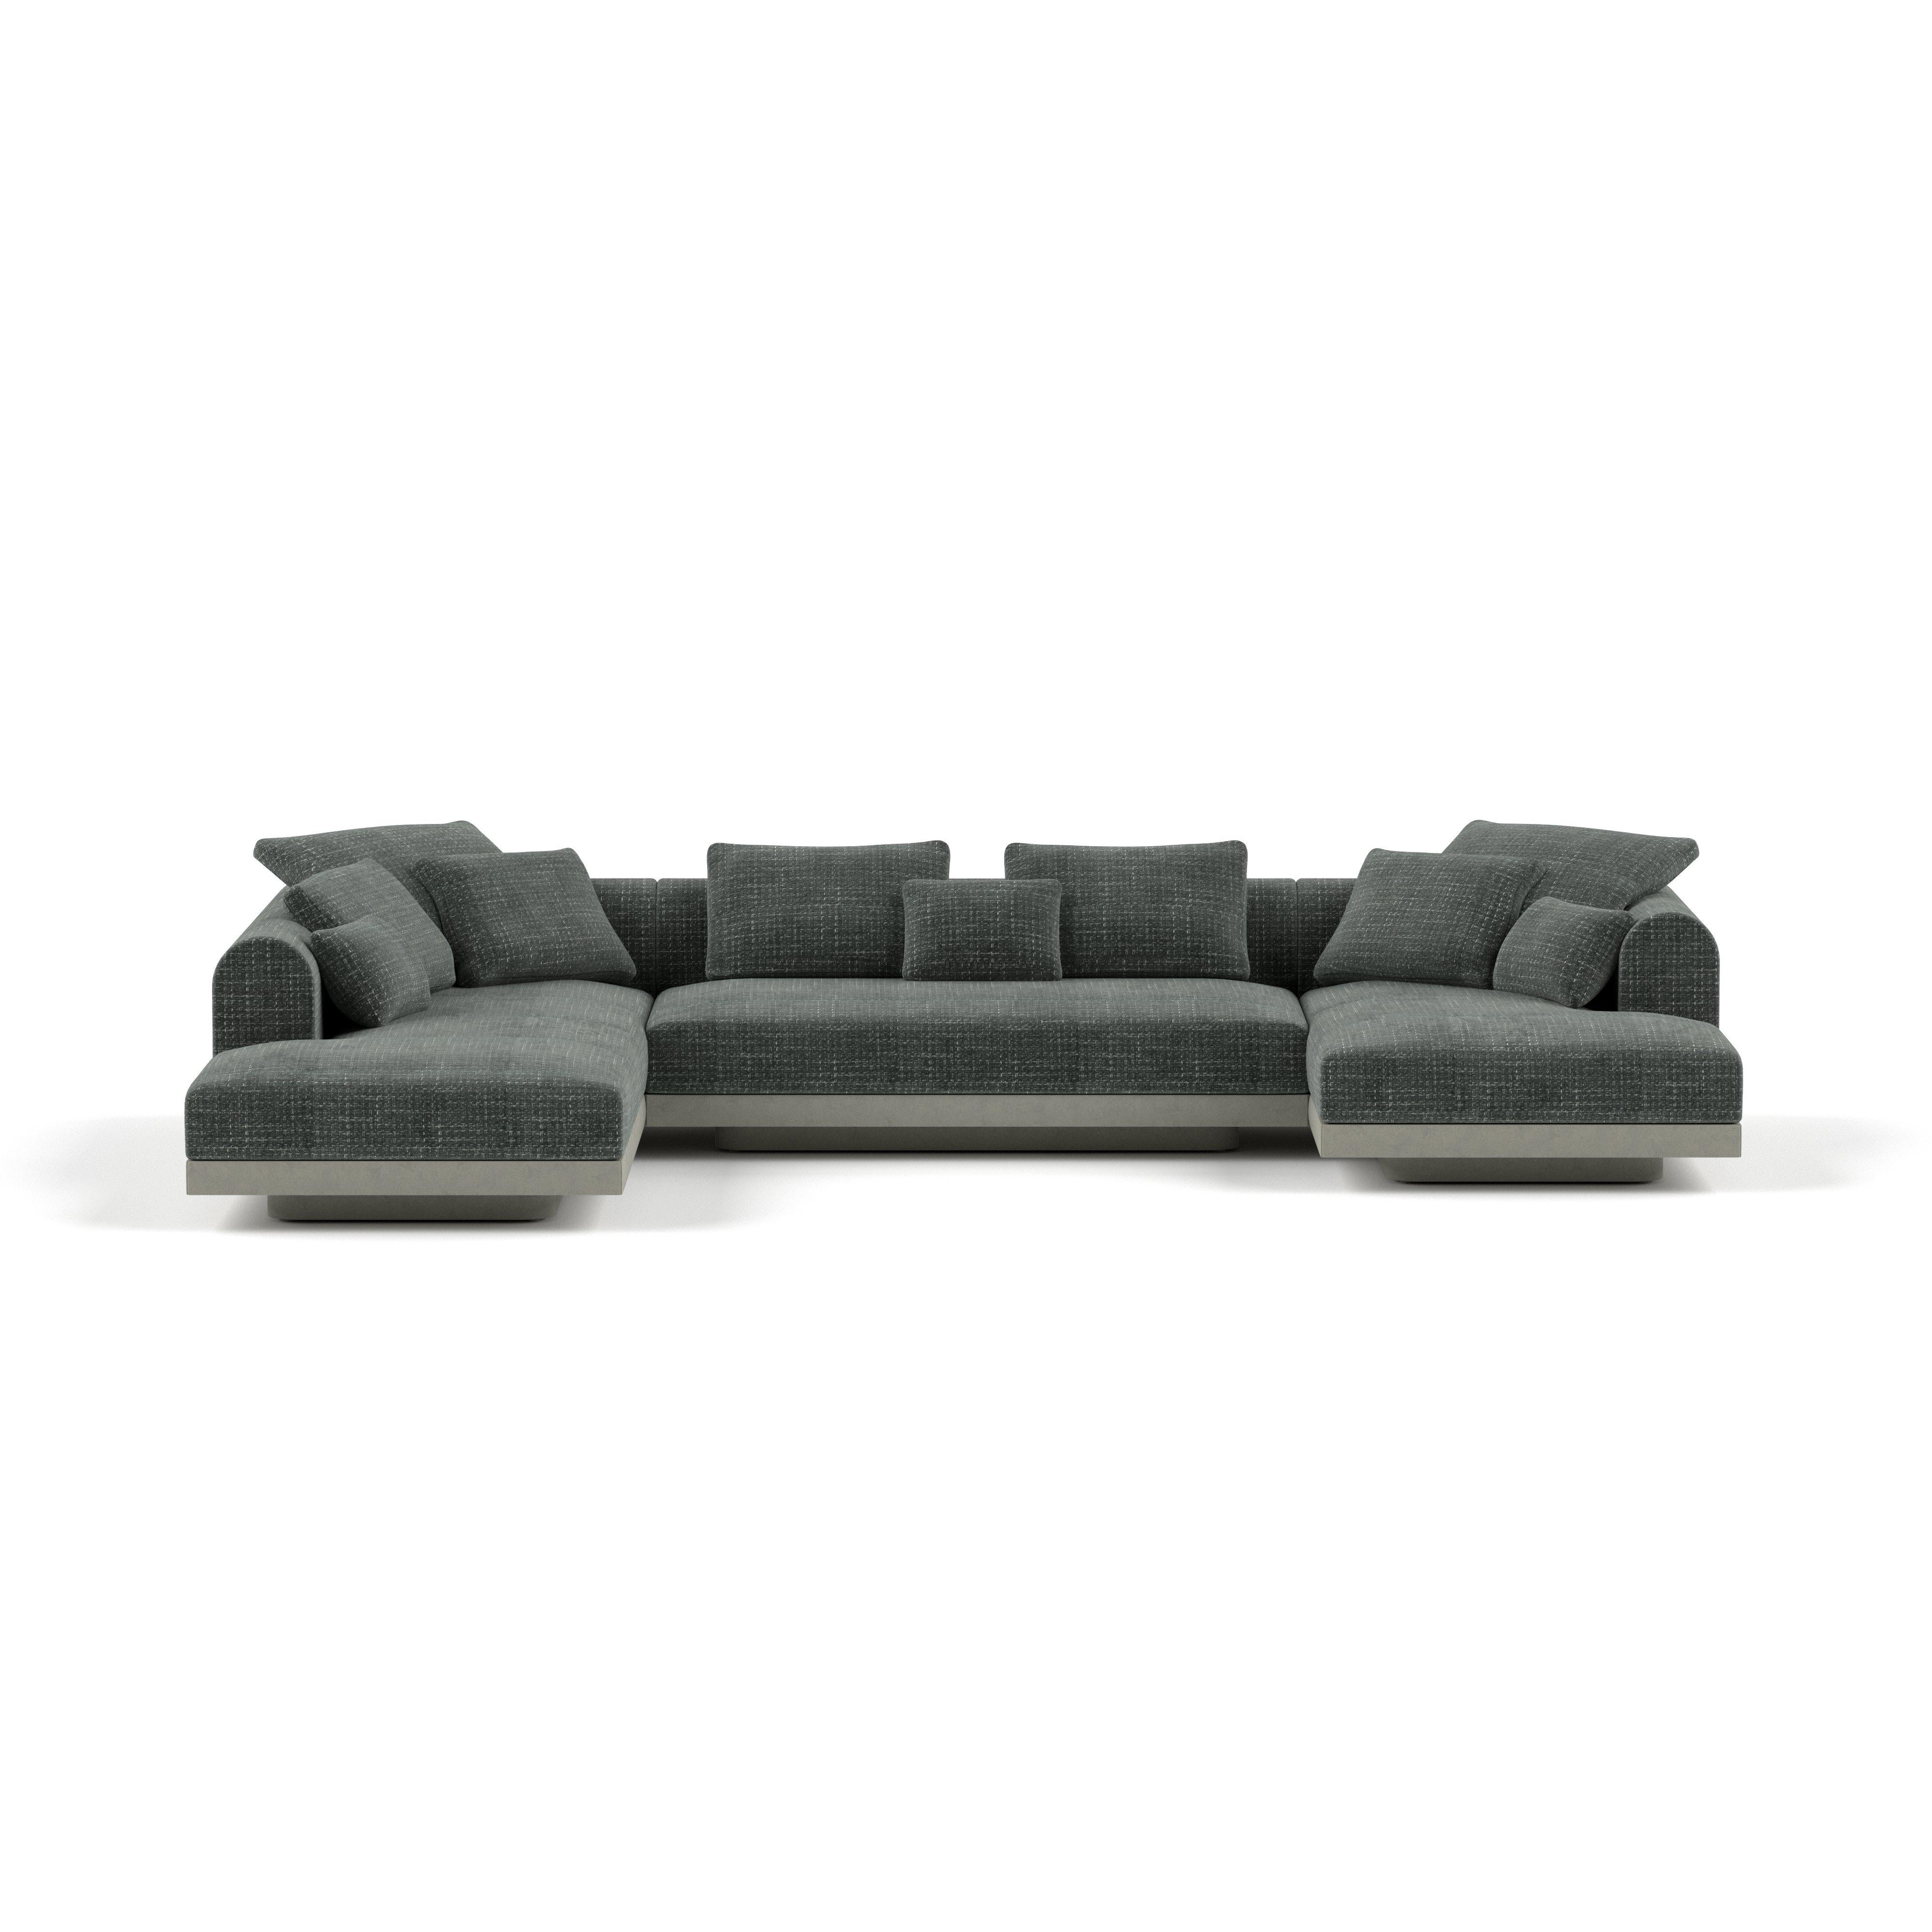 'Aqueduct' Contemporary Sofa by Poiat, Setup 4, Yang 95, HIgh Plinth For Sale 4